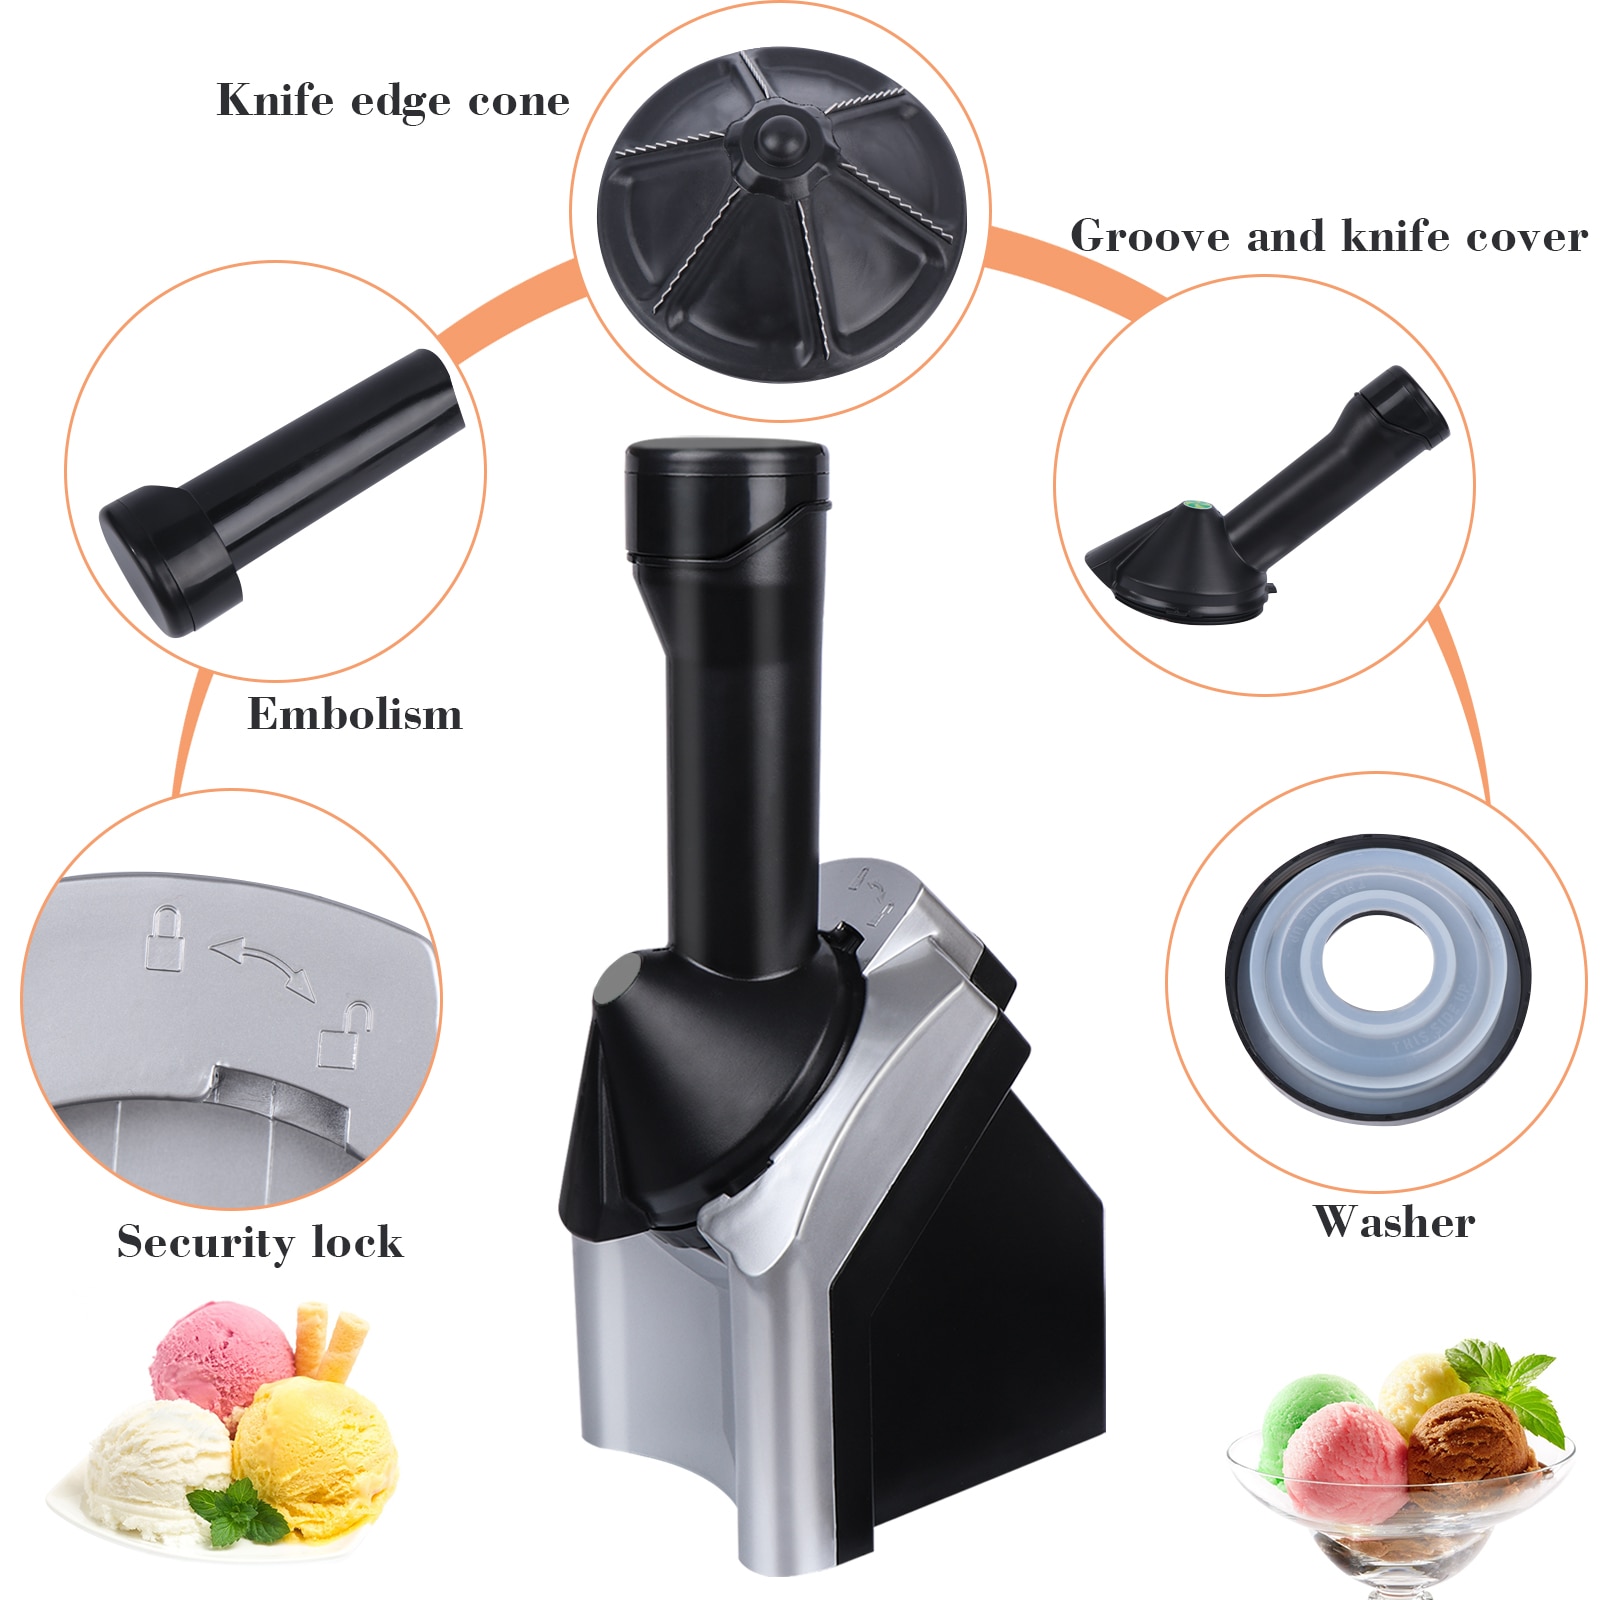 Automatic Ice Cream Maker for Healthy Treats